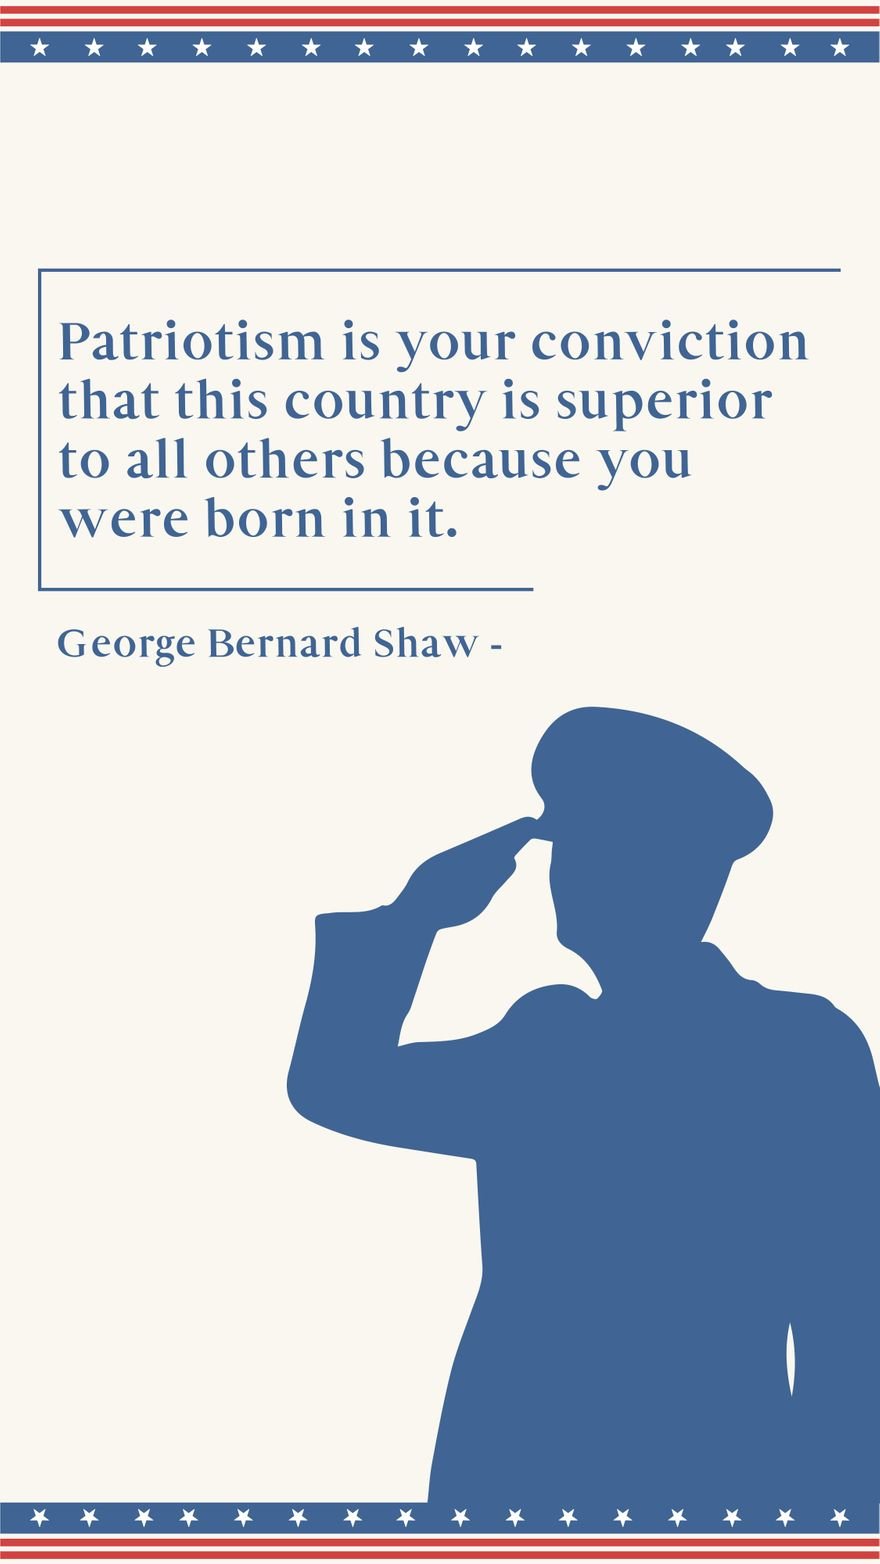 George Bernard Shaw - Patriotism is your conviction that this country is superior to all others because you were born in it. in JPG